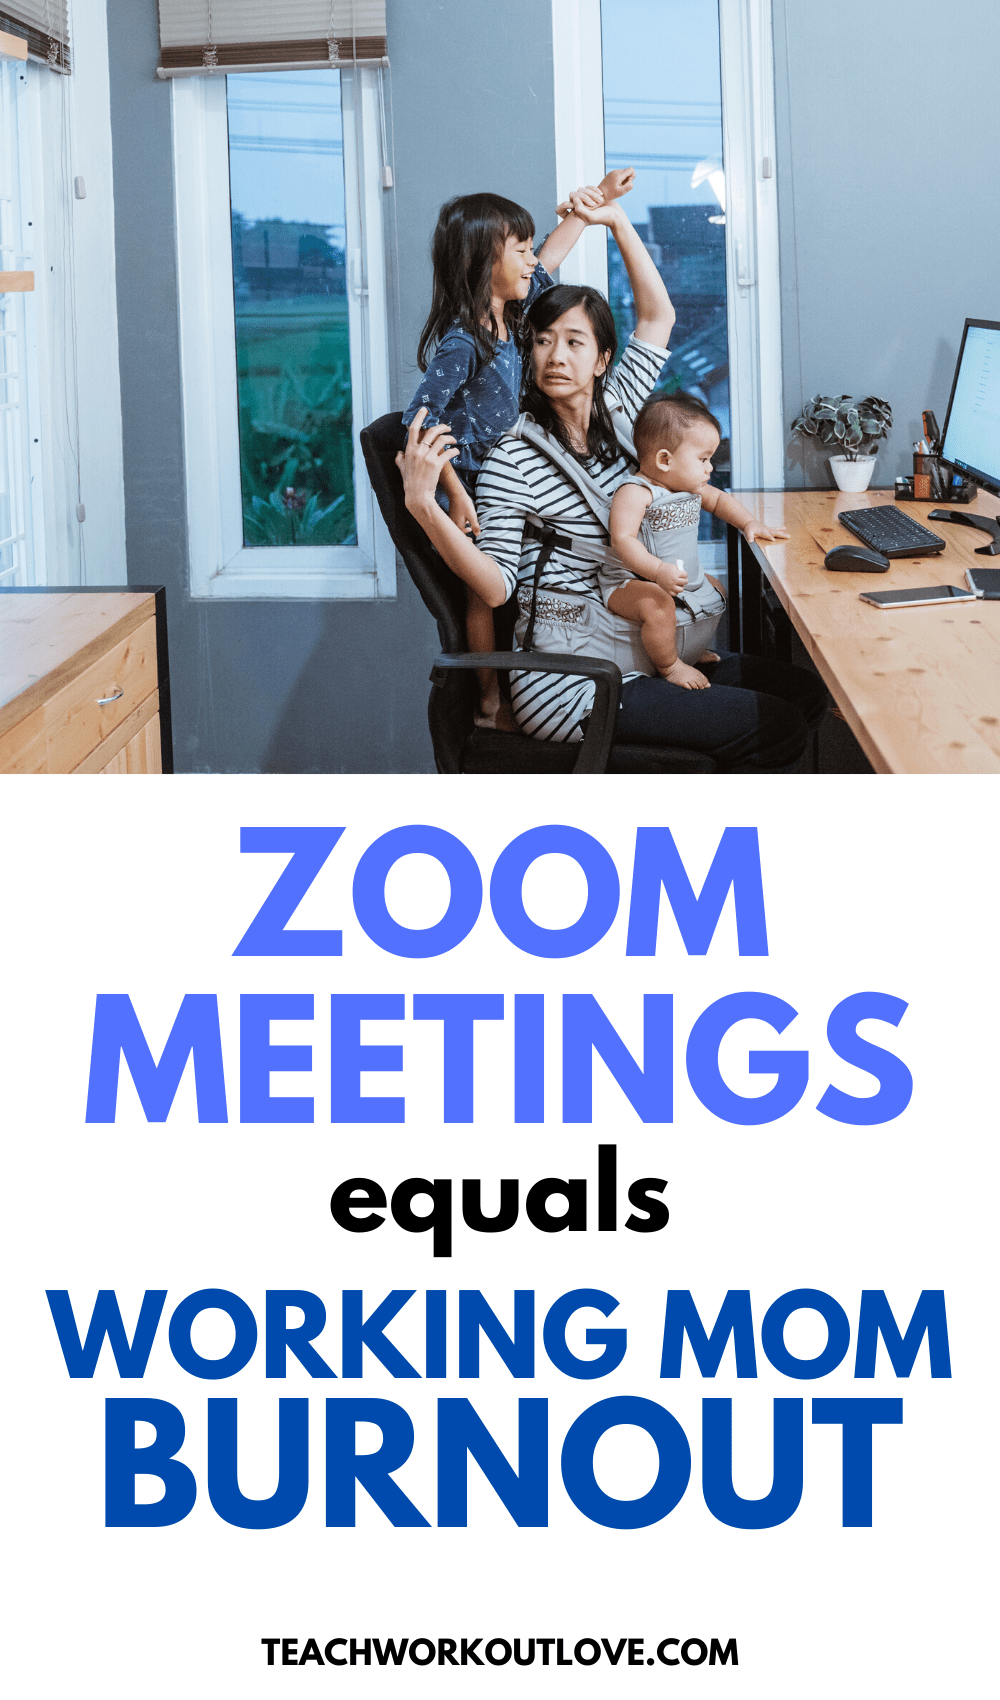 Zoom Meetings are a new working mom nightmare! Let’s dig deeper and look at the bigger picture of why and how working moms are dealing with it.